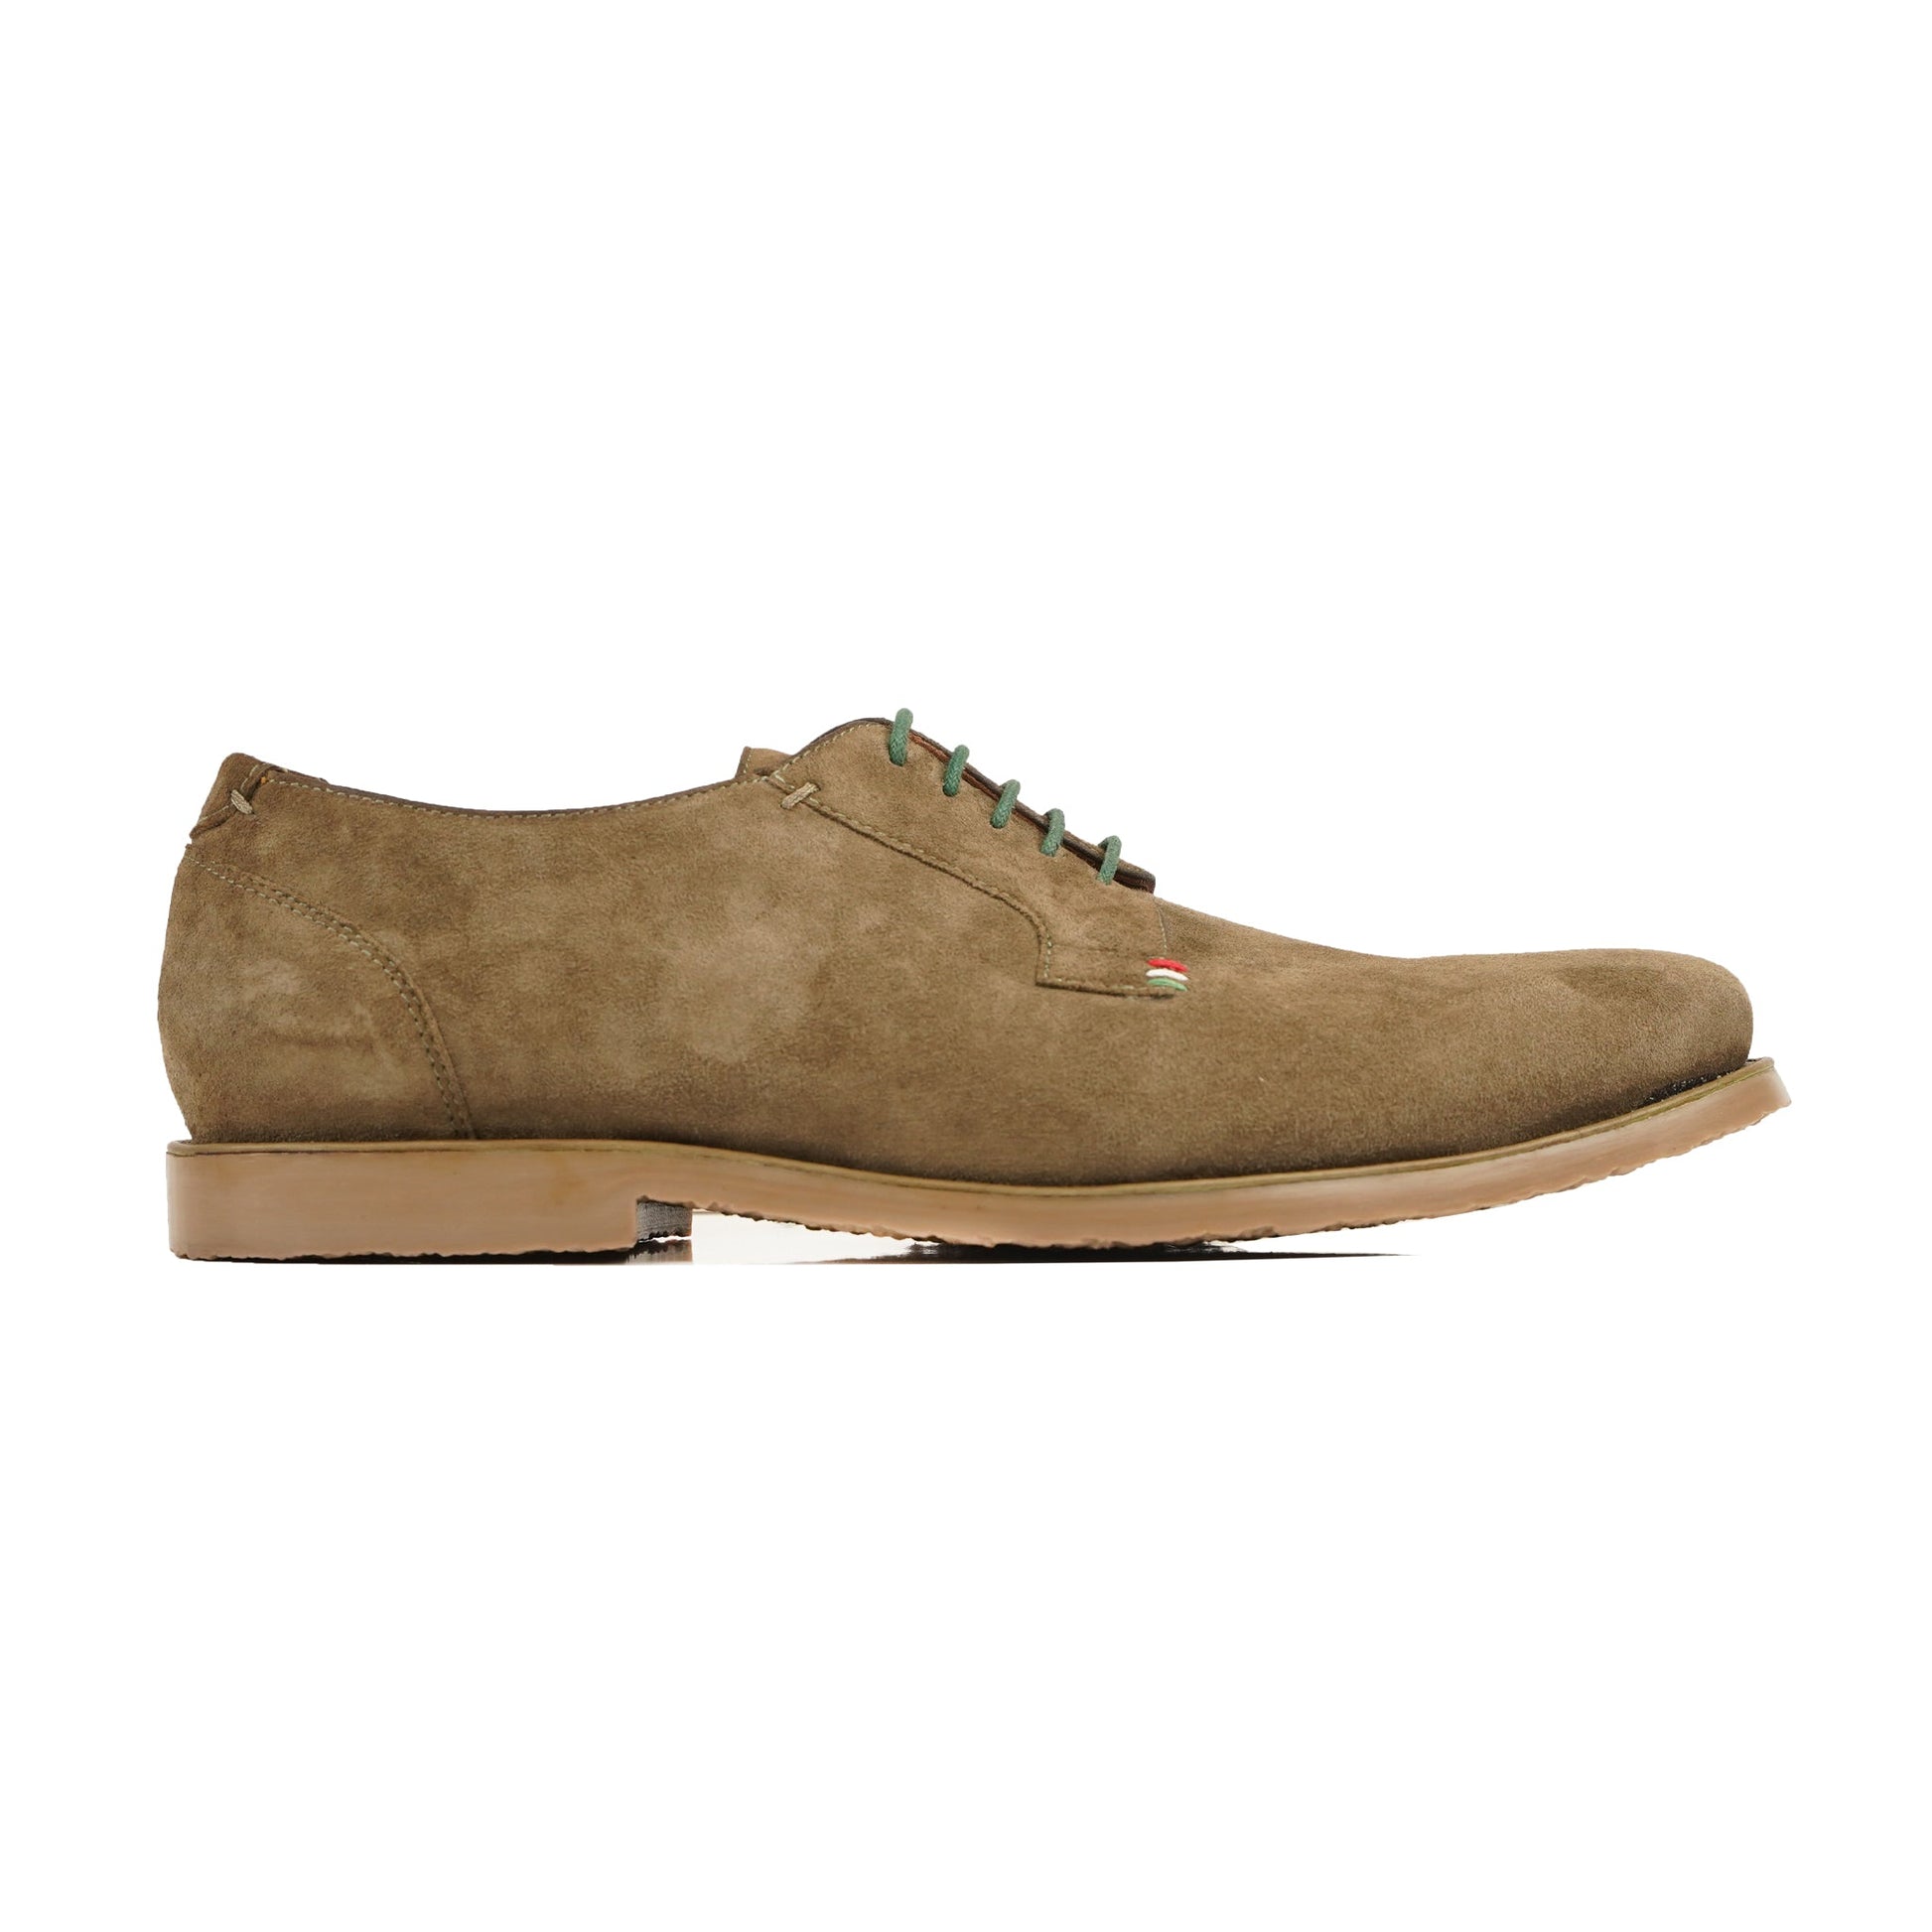 Casual Suede Leather Derby Shoes: Effortless Style and Comfort in a Minimalist Design Casual Suede Leather Derby Shoes: Effortless Style and Comfort in a Minimalist Design, Derby Boots, derby shoes, derby shoes men, GOMILA(MADE TO ORDER)_DERBY, Leather Boots